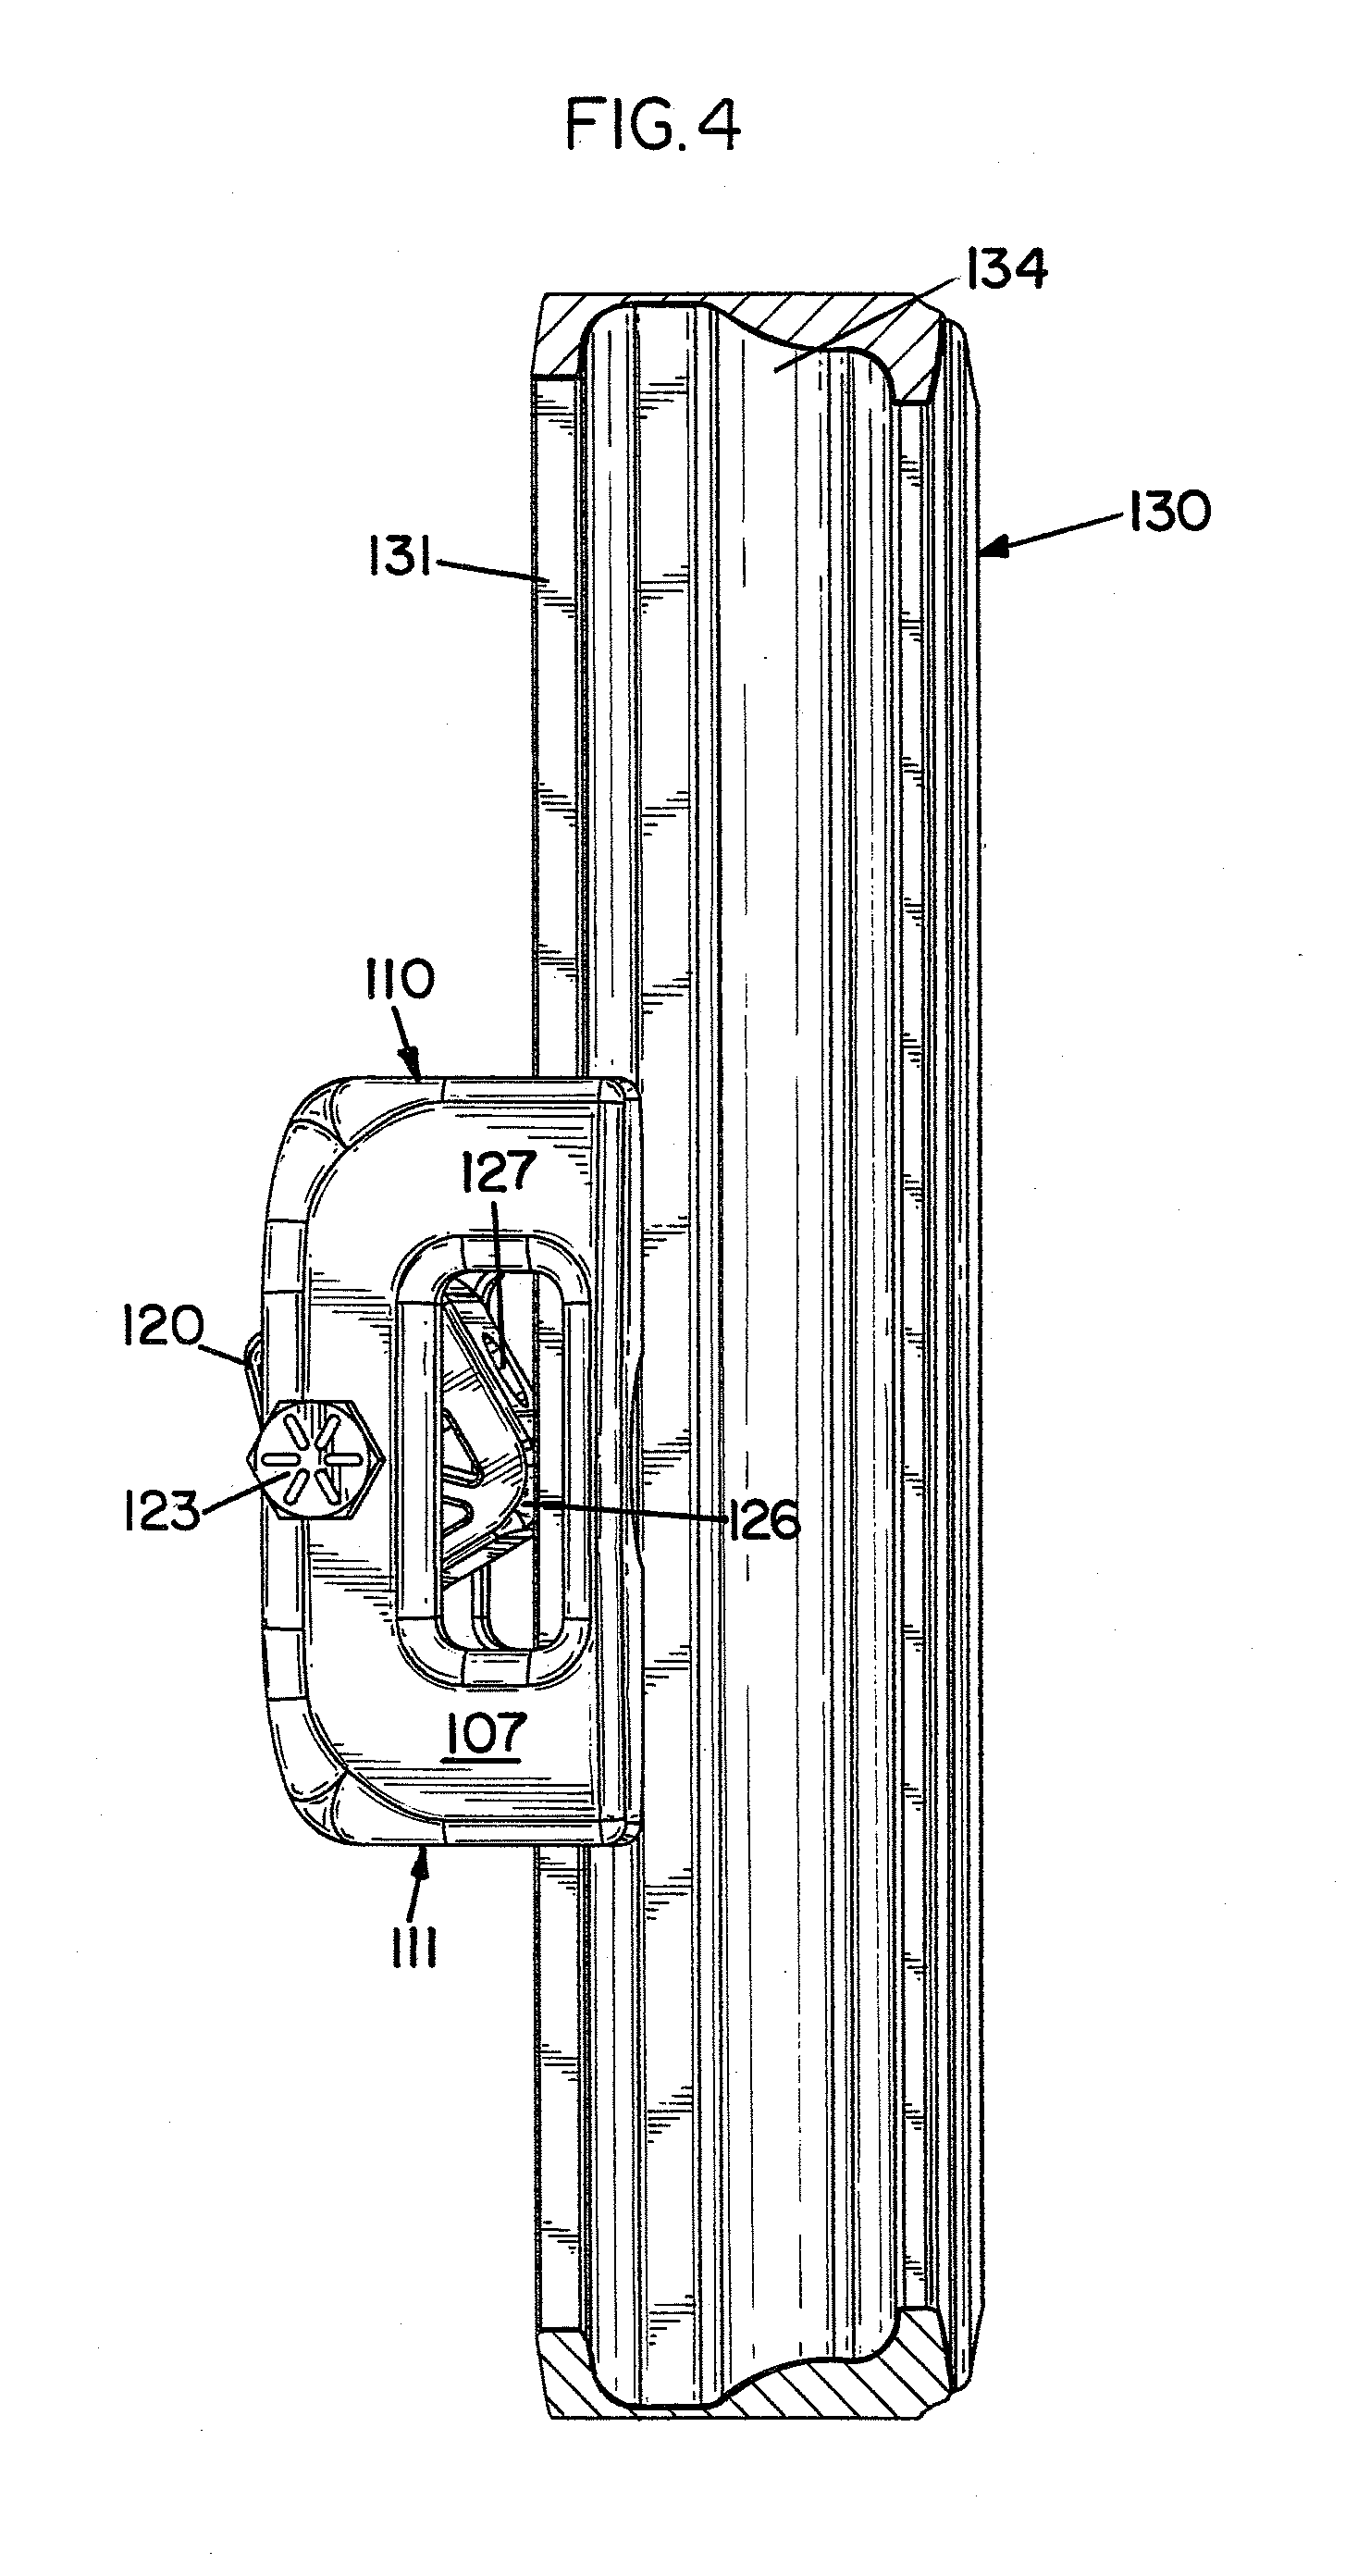 Fall protection safety device with a braking mechanism